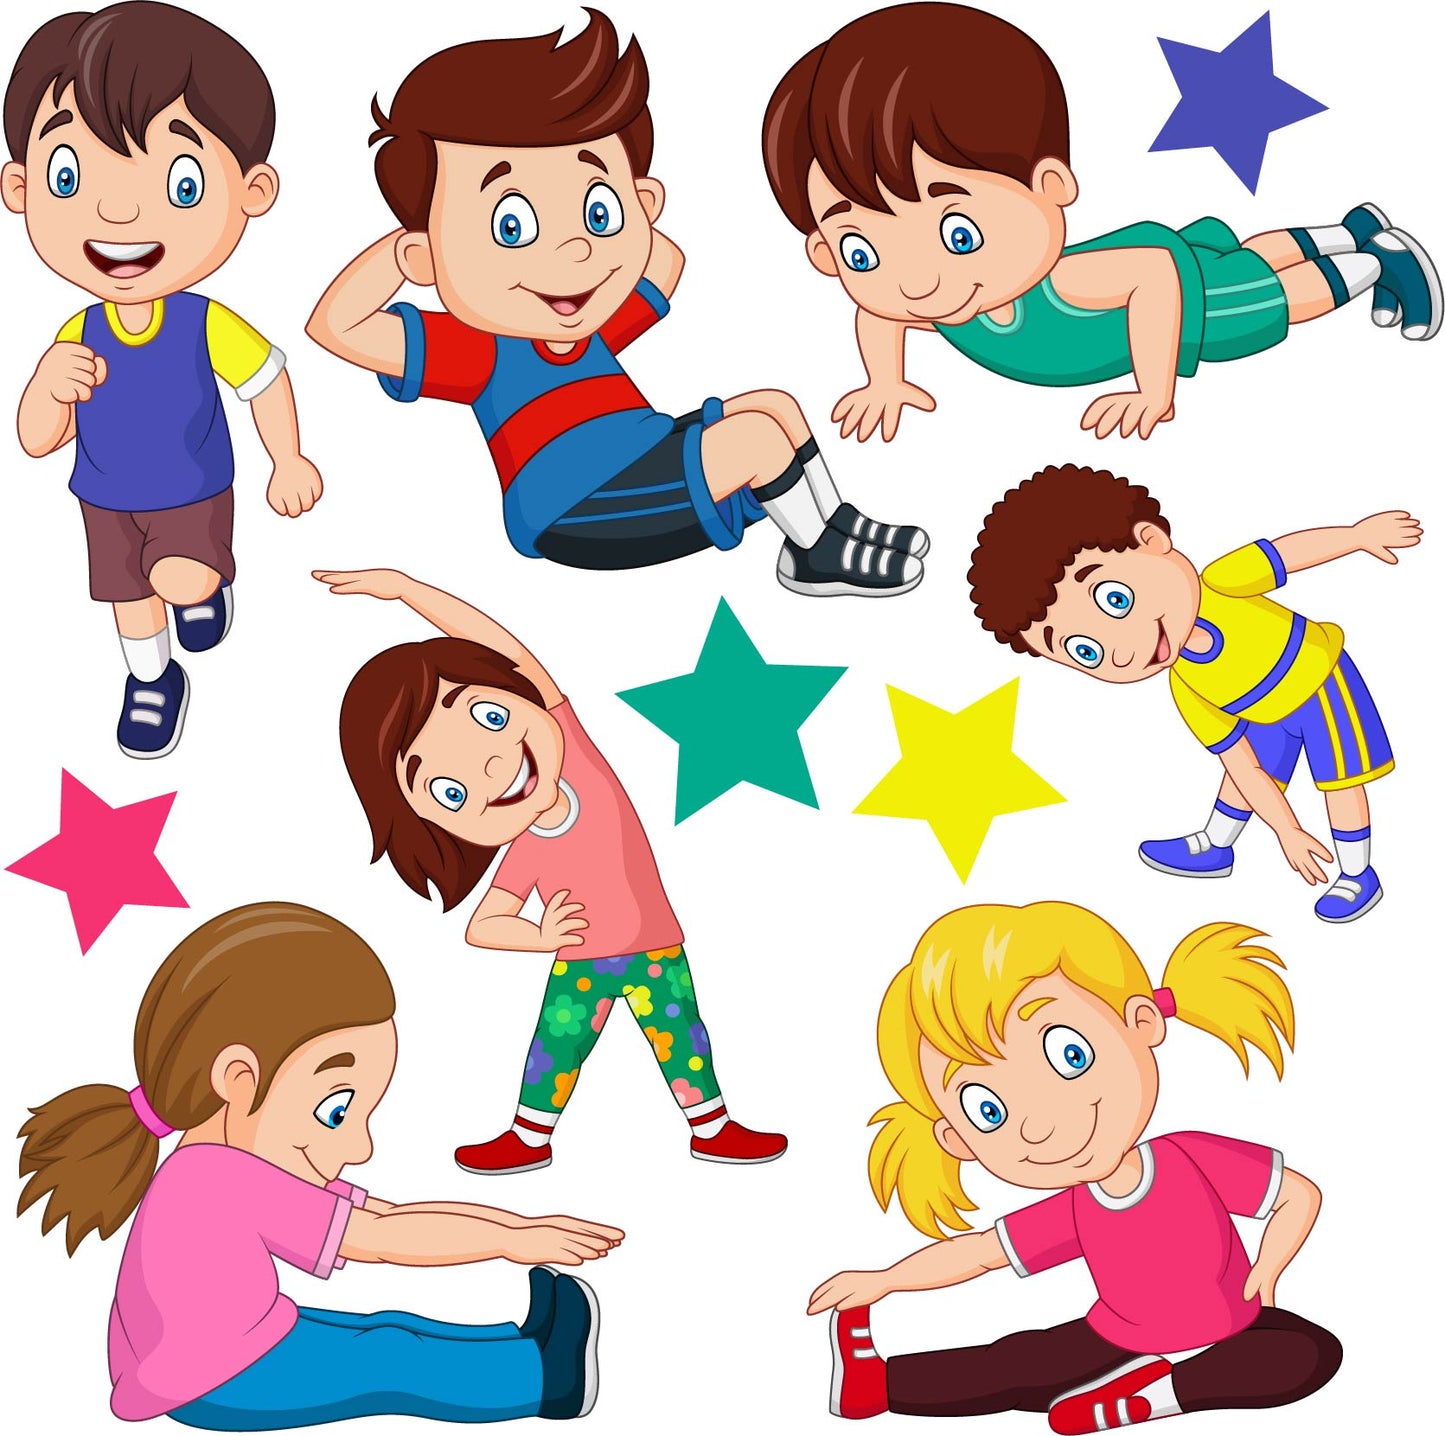 School - Back to School - Kids and Children Exercising -  Half Sheet Misc. (Must Purchase 2 Half sheets - You Can Mix & Match)